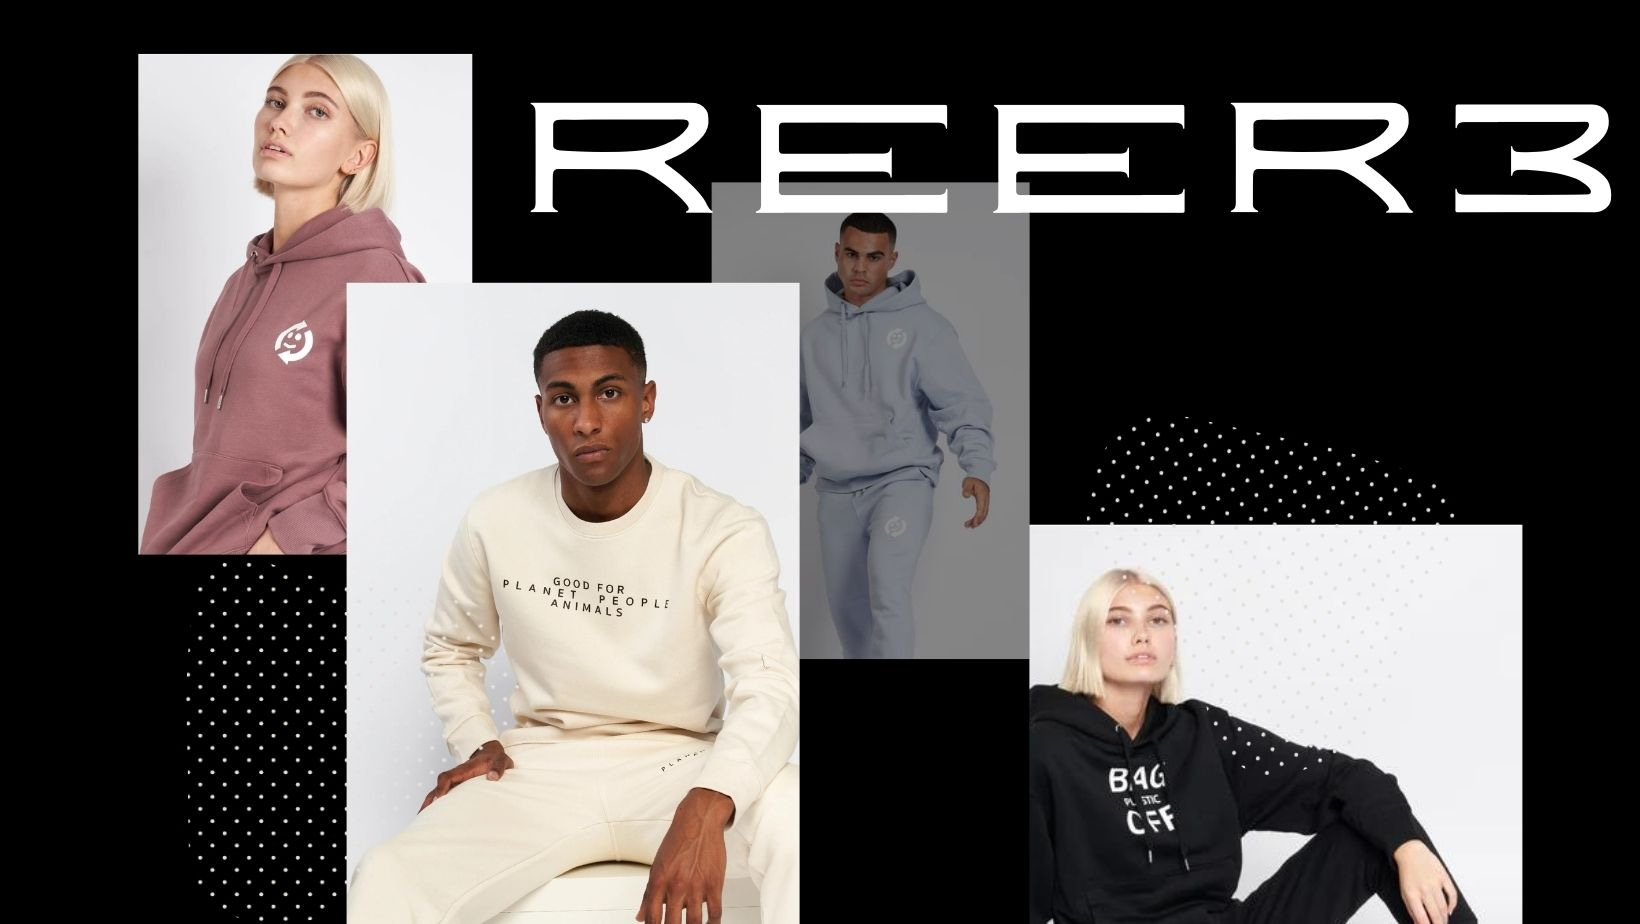 A collage of images showing tracksuits made by reer3 sustainable fashion brand